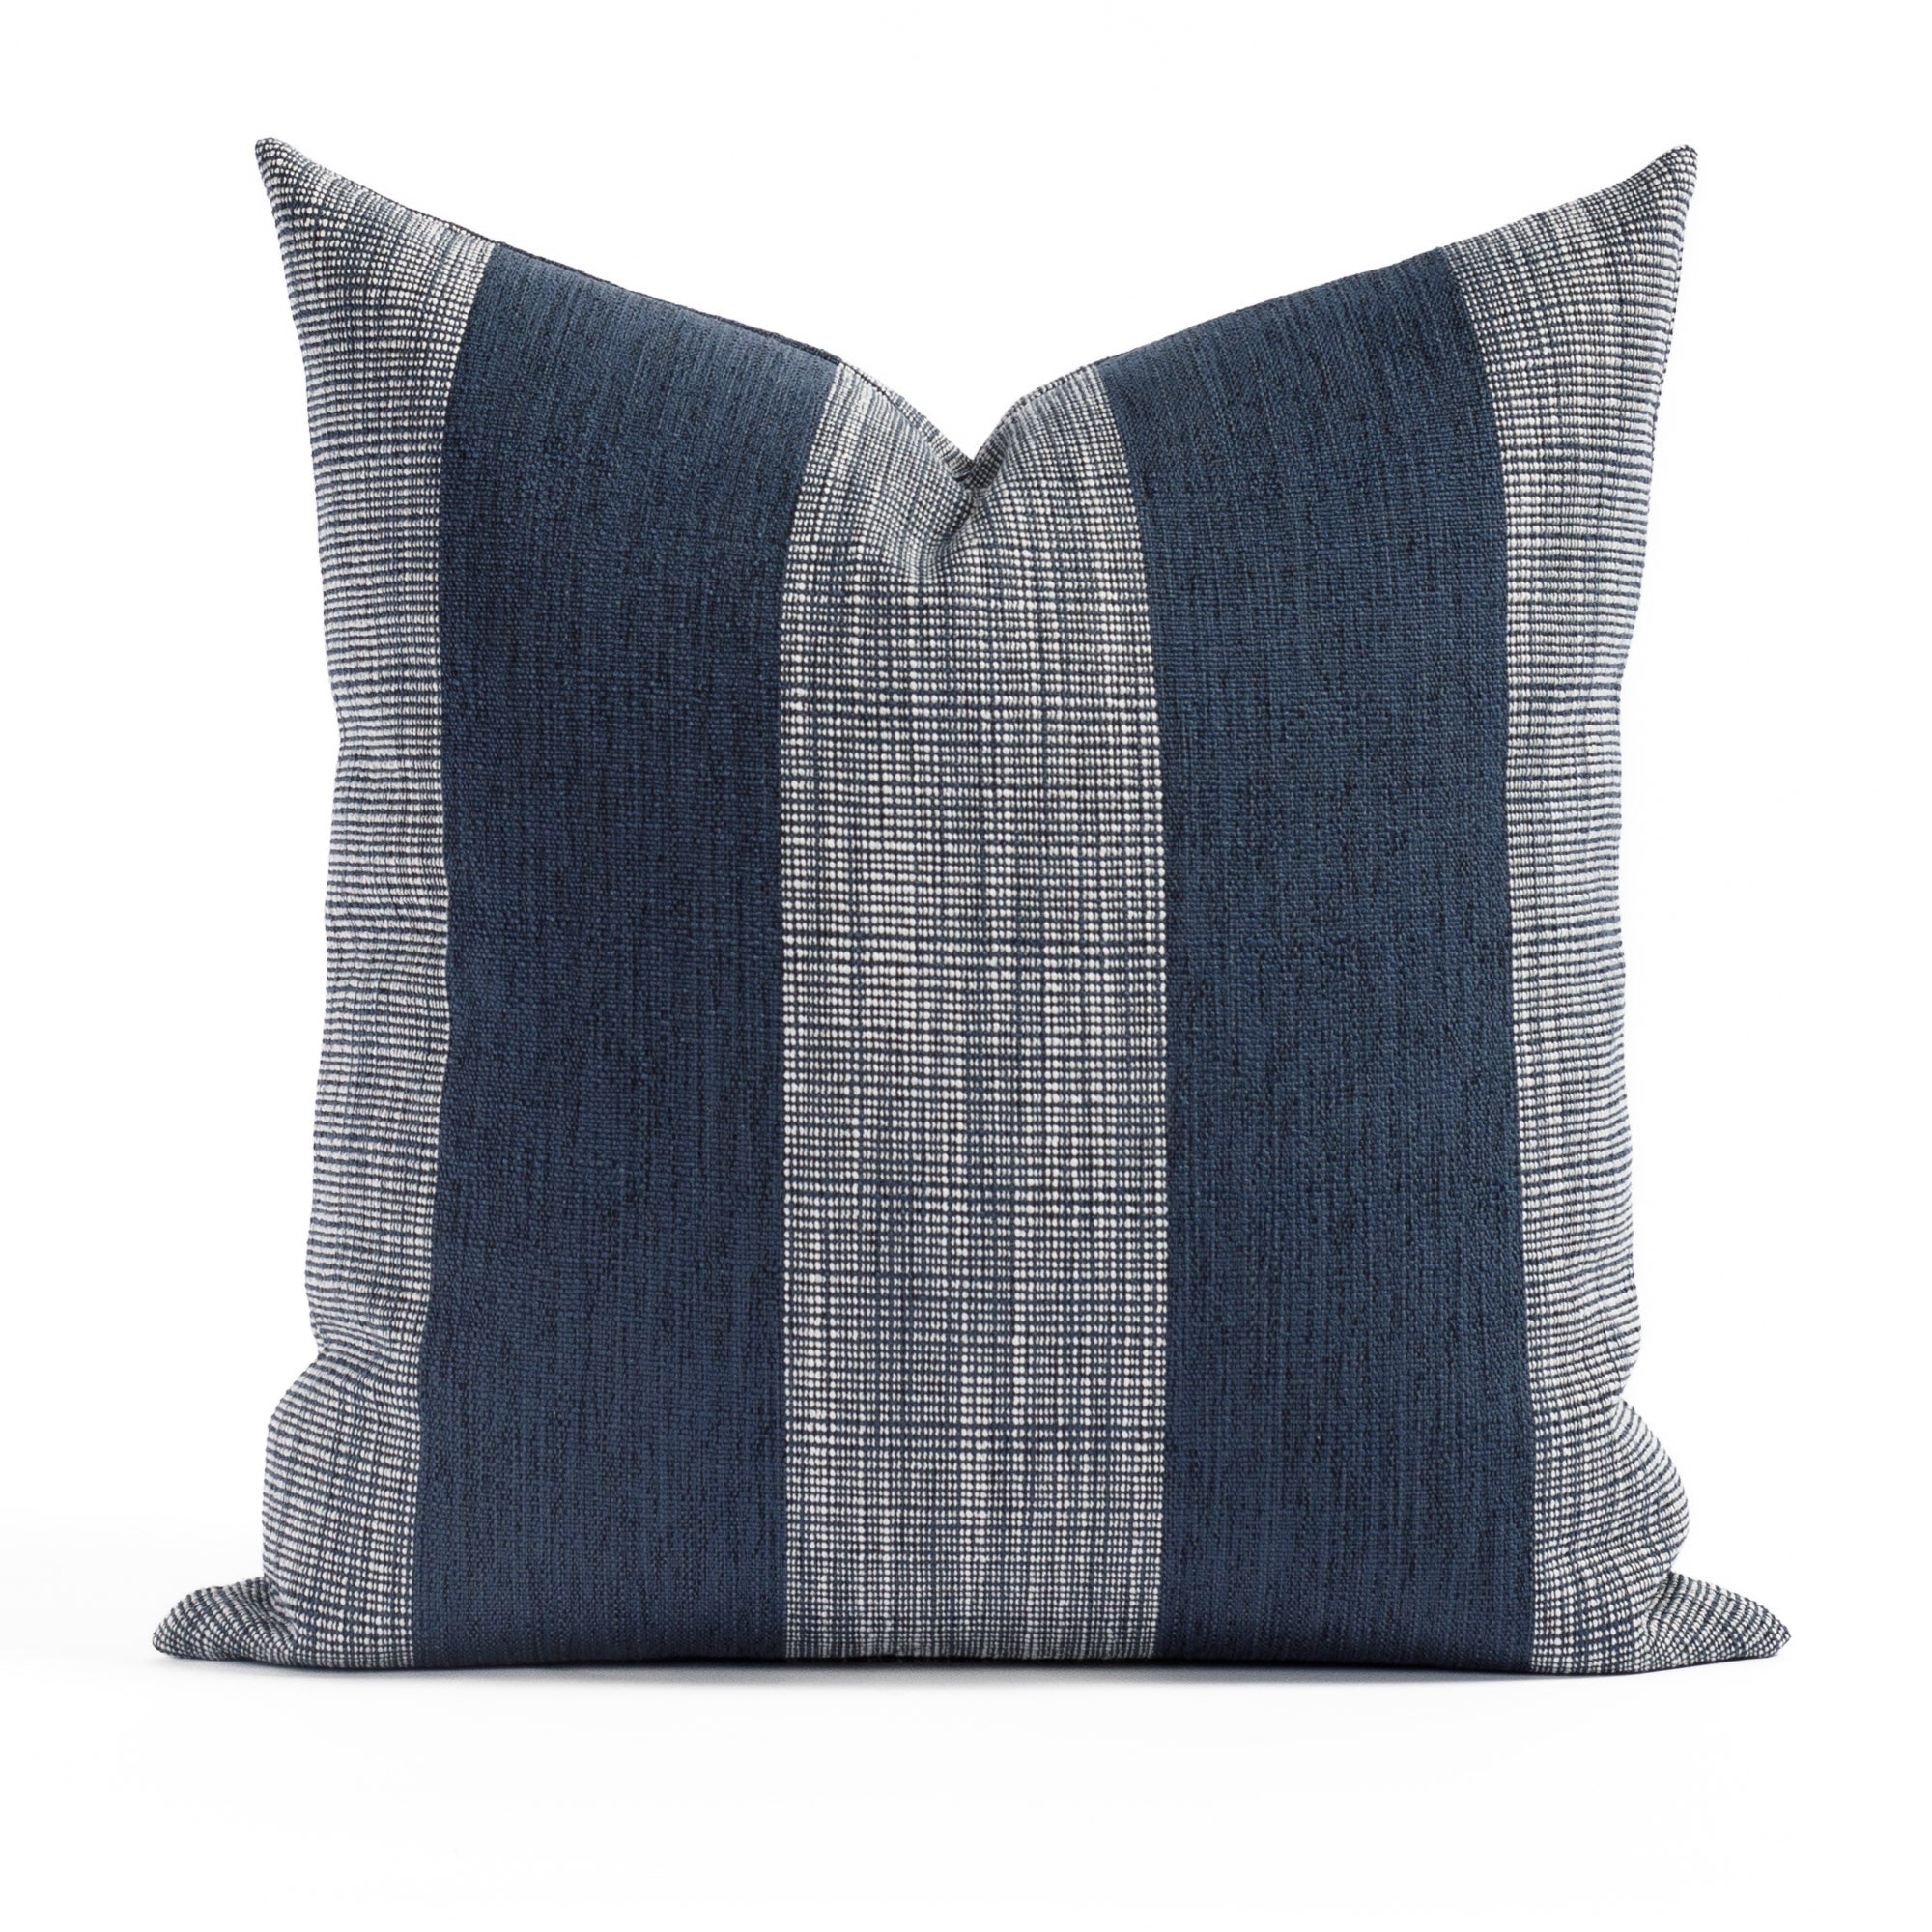 Marlow 20x20 Pillow Indigo, a deep blue and white vertical wide striped pillow from Tonic Living 